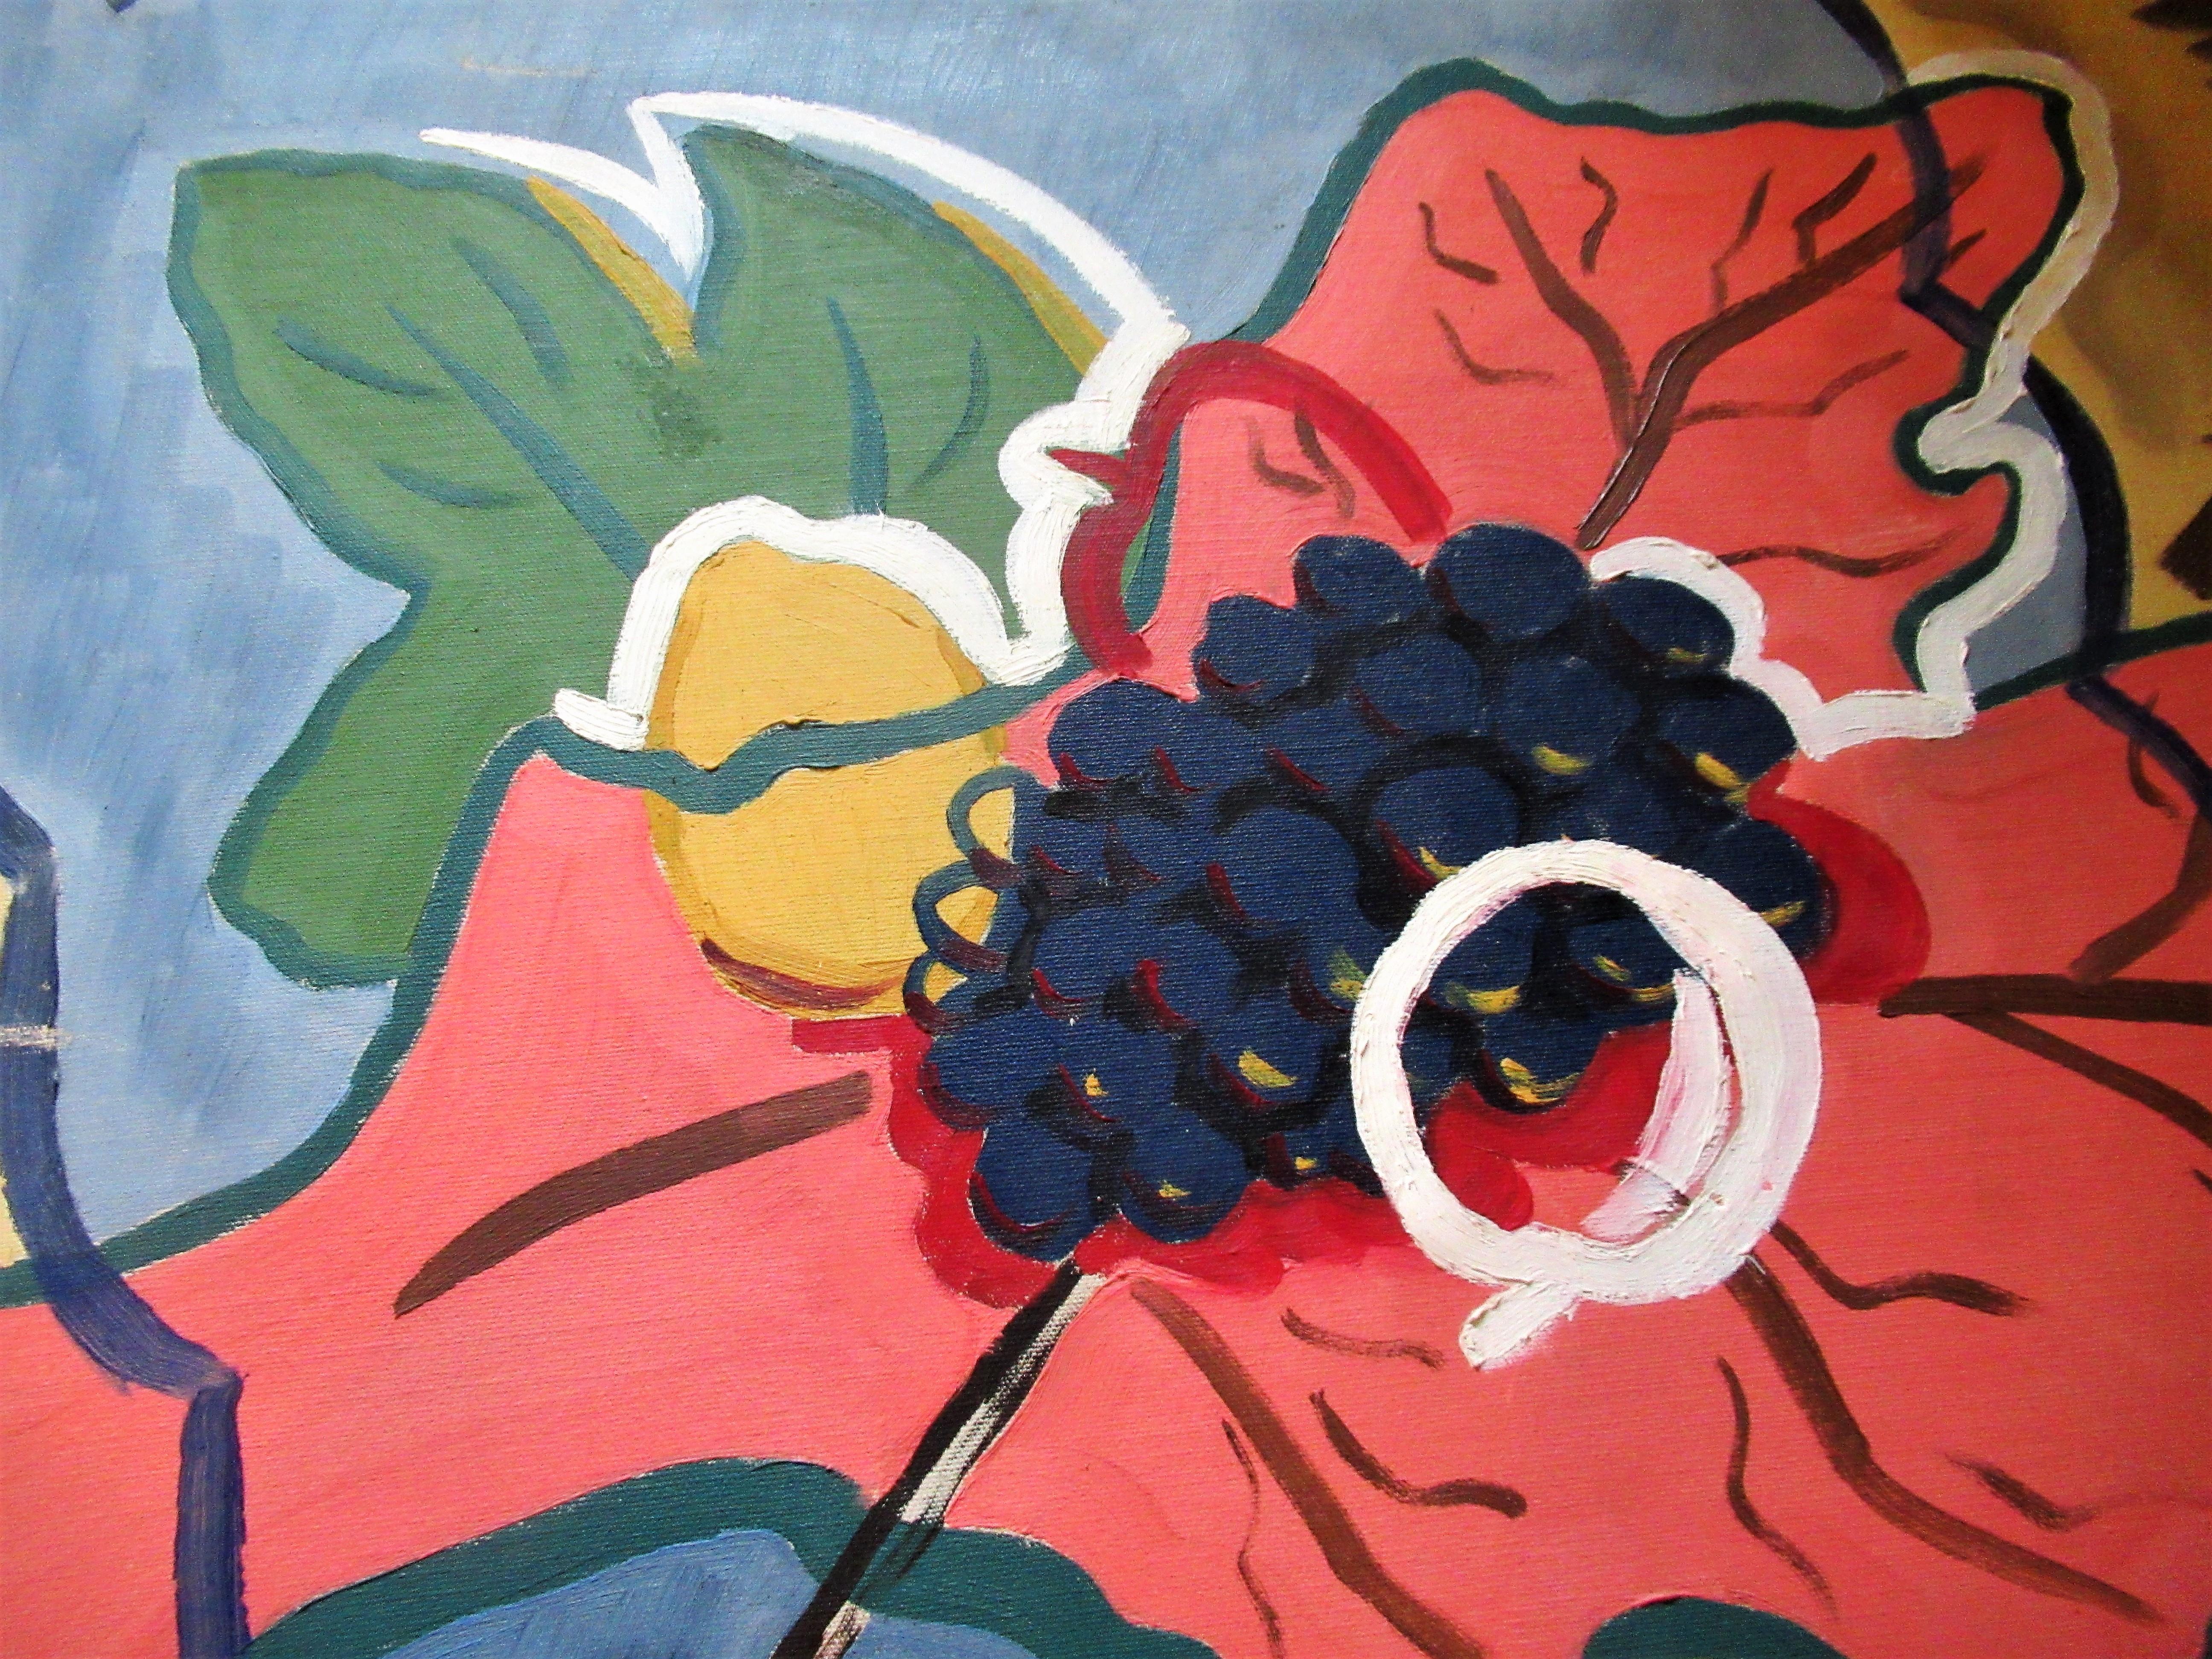 A very bold abstract primitive flower leaf and grapes painting by Leon Salter aka Zoute (1903-1976 North Rose, NY) with great spontaneity and warm brilliant inviting colors. Signed Zoute bottom right. Not dated yet this is indicative of his work